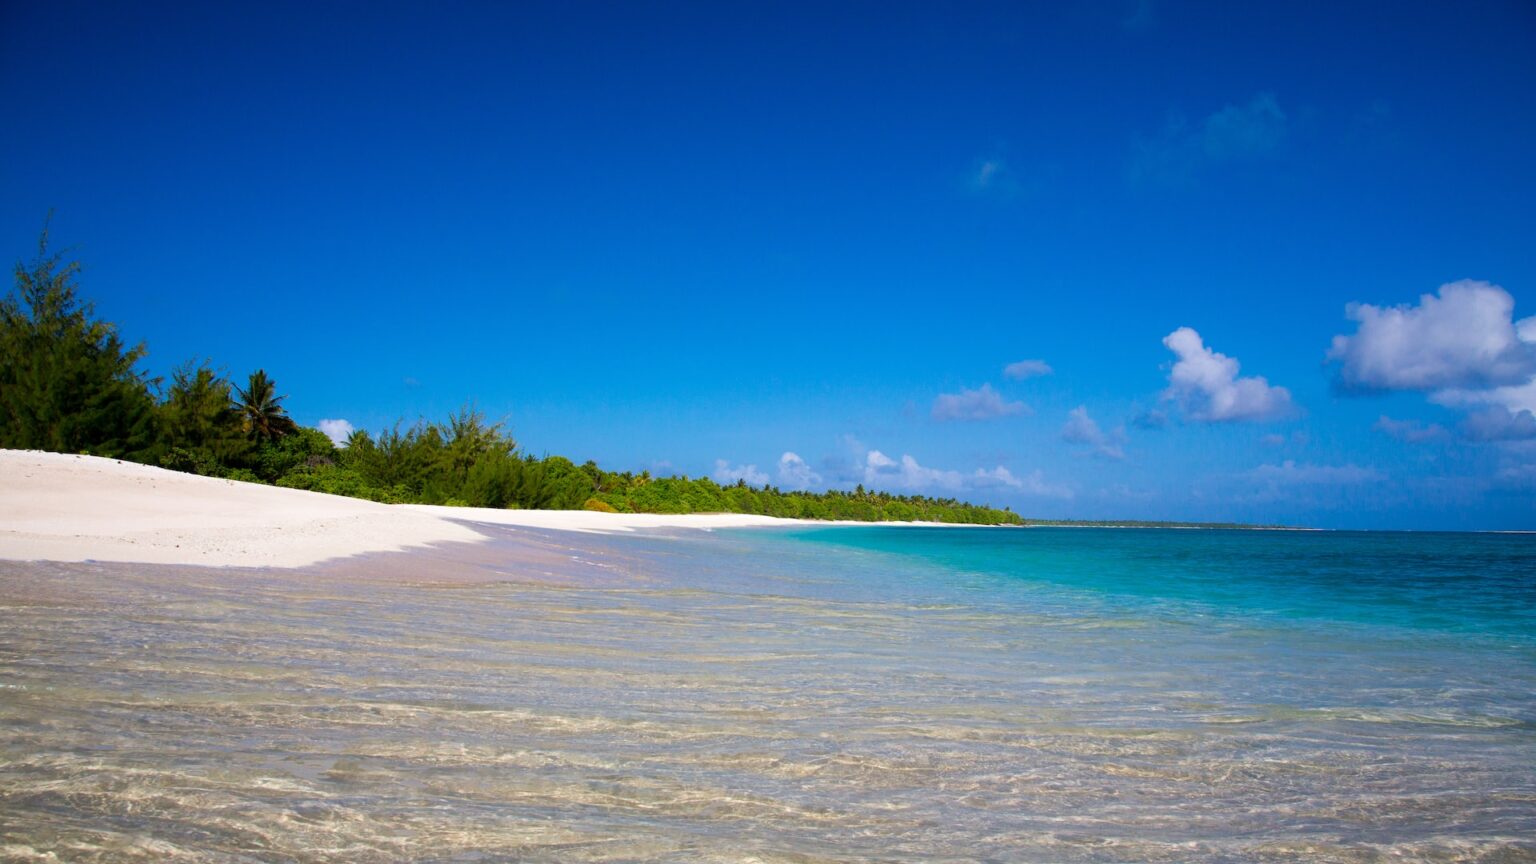 A photo of a sandy beach and blue ocean water on one of the islands in the Marshall Islands, highlighting the natural beauty of the country and its vulnerable location in the Pacific Ocean susceptible to the impacts of climate change.